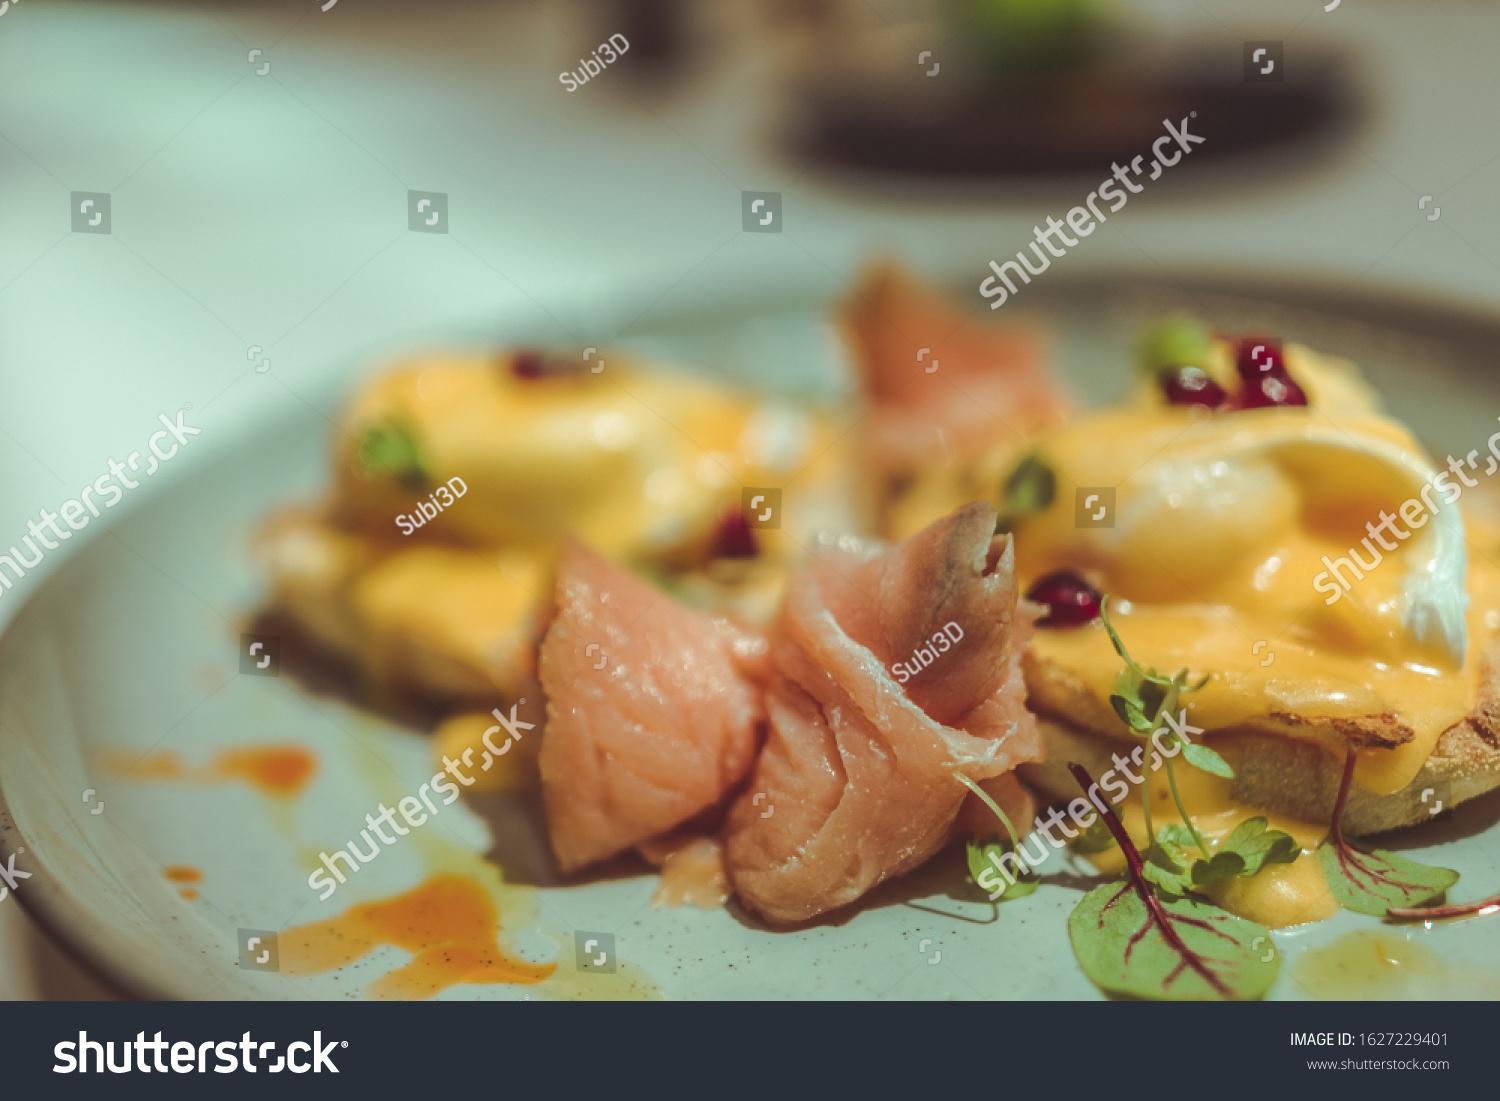 Breakfast meals with smoked salmon as a key element of the meal. #1627229401